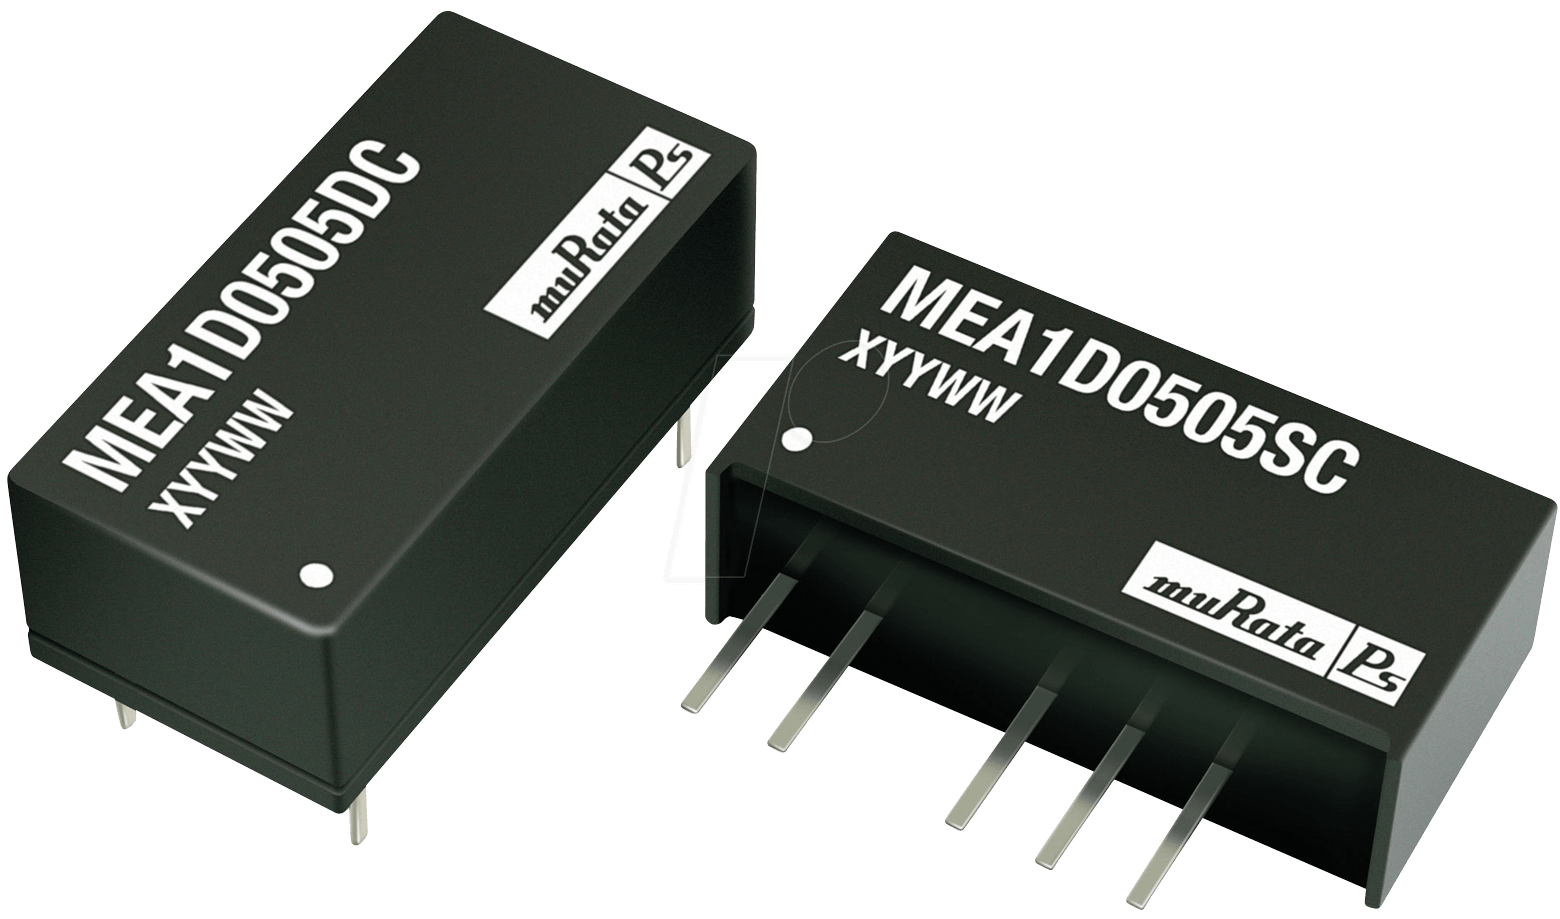 MEA1D1215SC - DC/DC-Wandler MEA, 1 W, 15 V, 33 mA, SIL, Dual von MURATA POWER SOLUTIONS